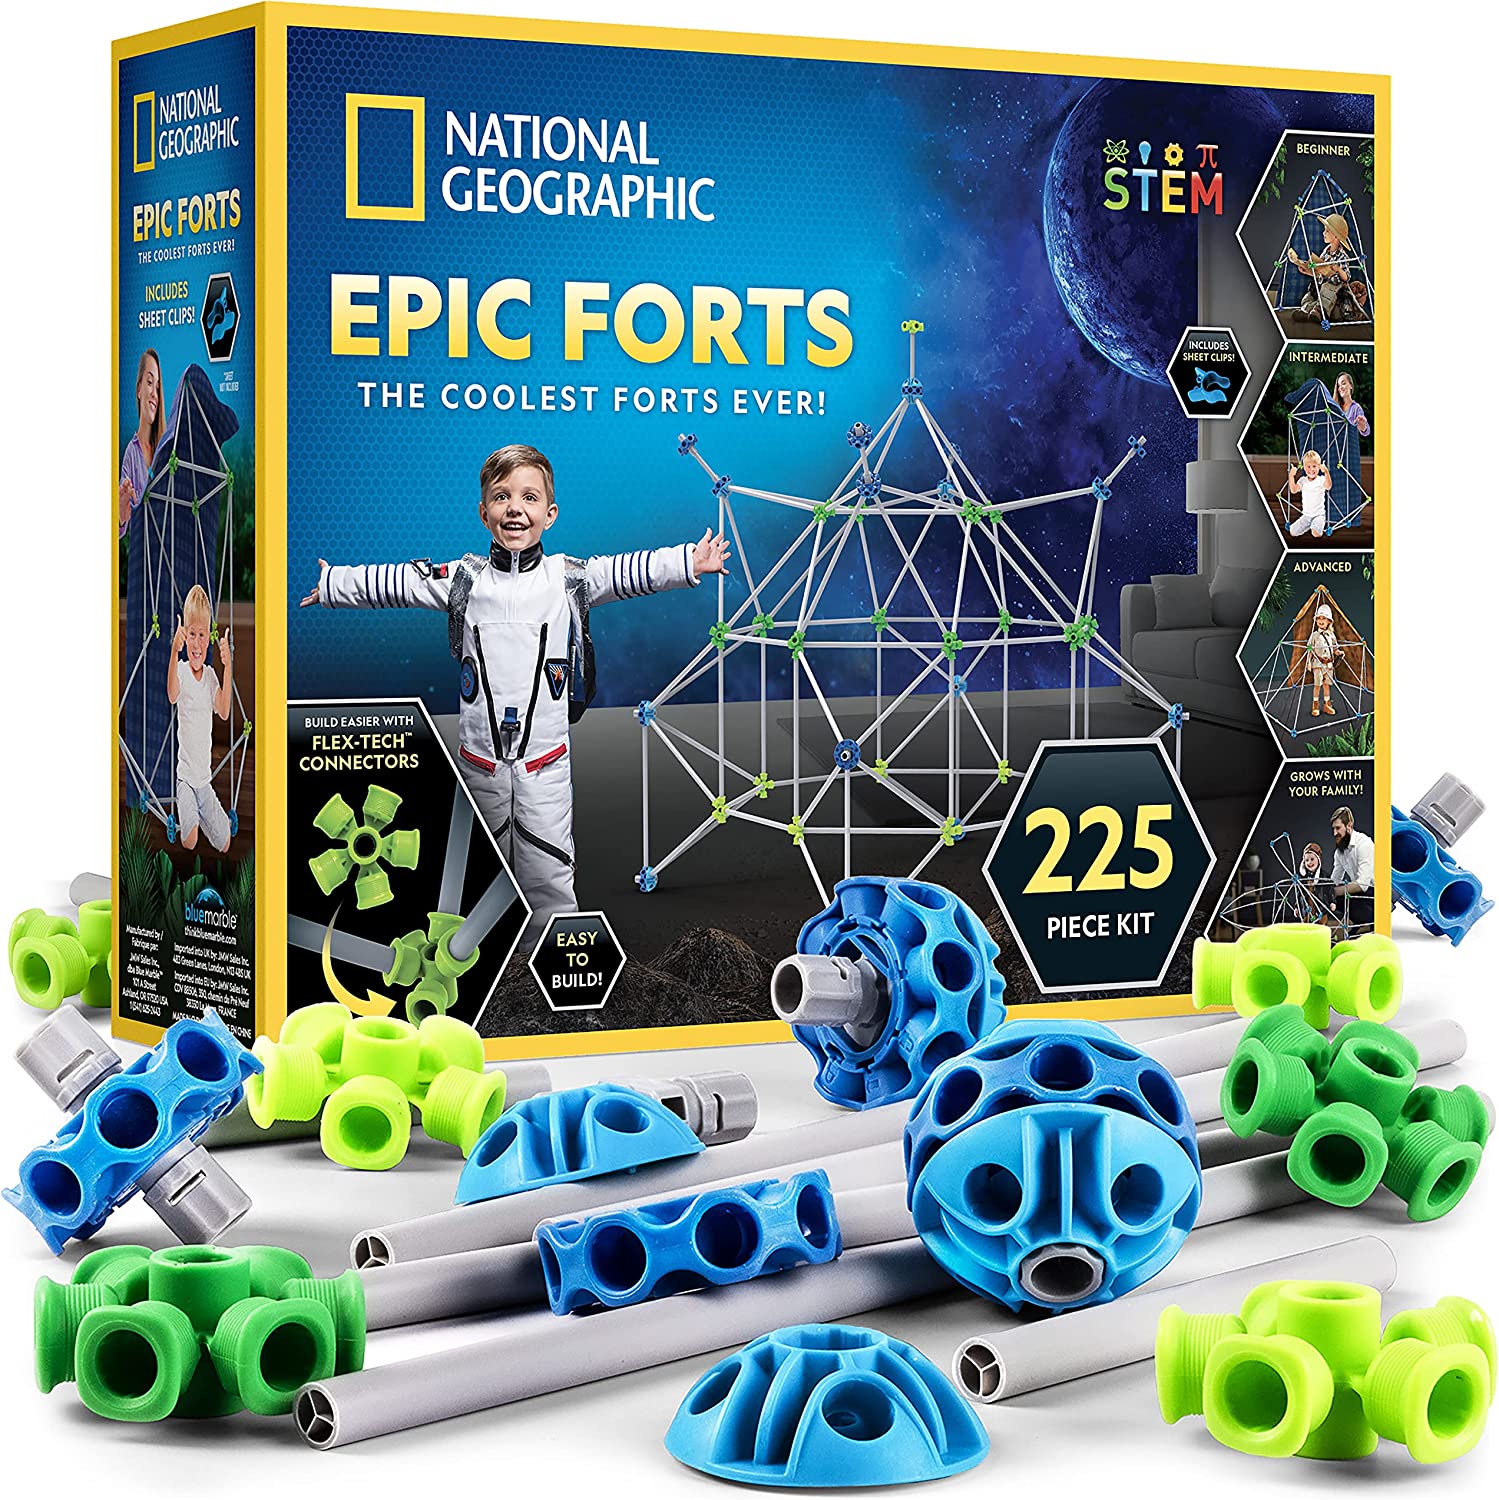 National Geographic Epic Forts Science Kit  Cool forts, National geographic,  Science kits